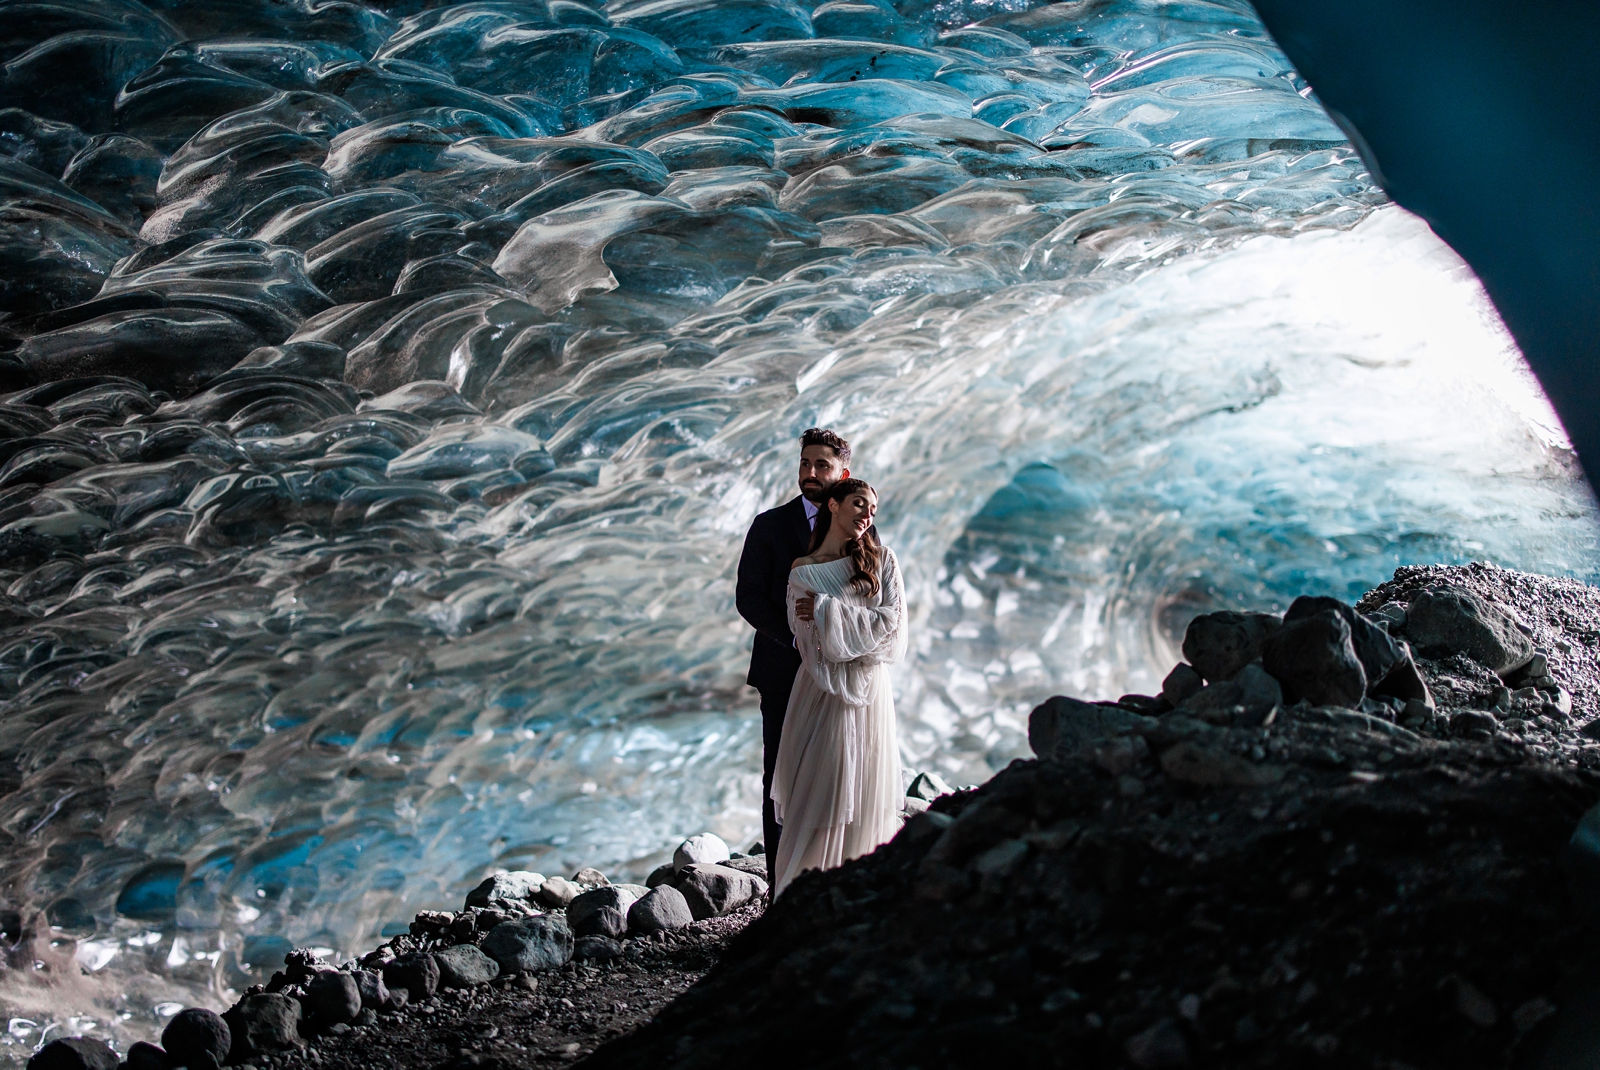 This eloping couple shares a tender moment in a magical Iceland ice cave.